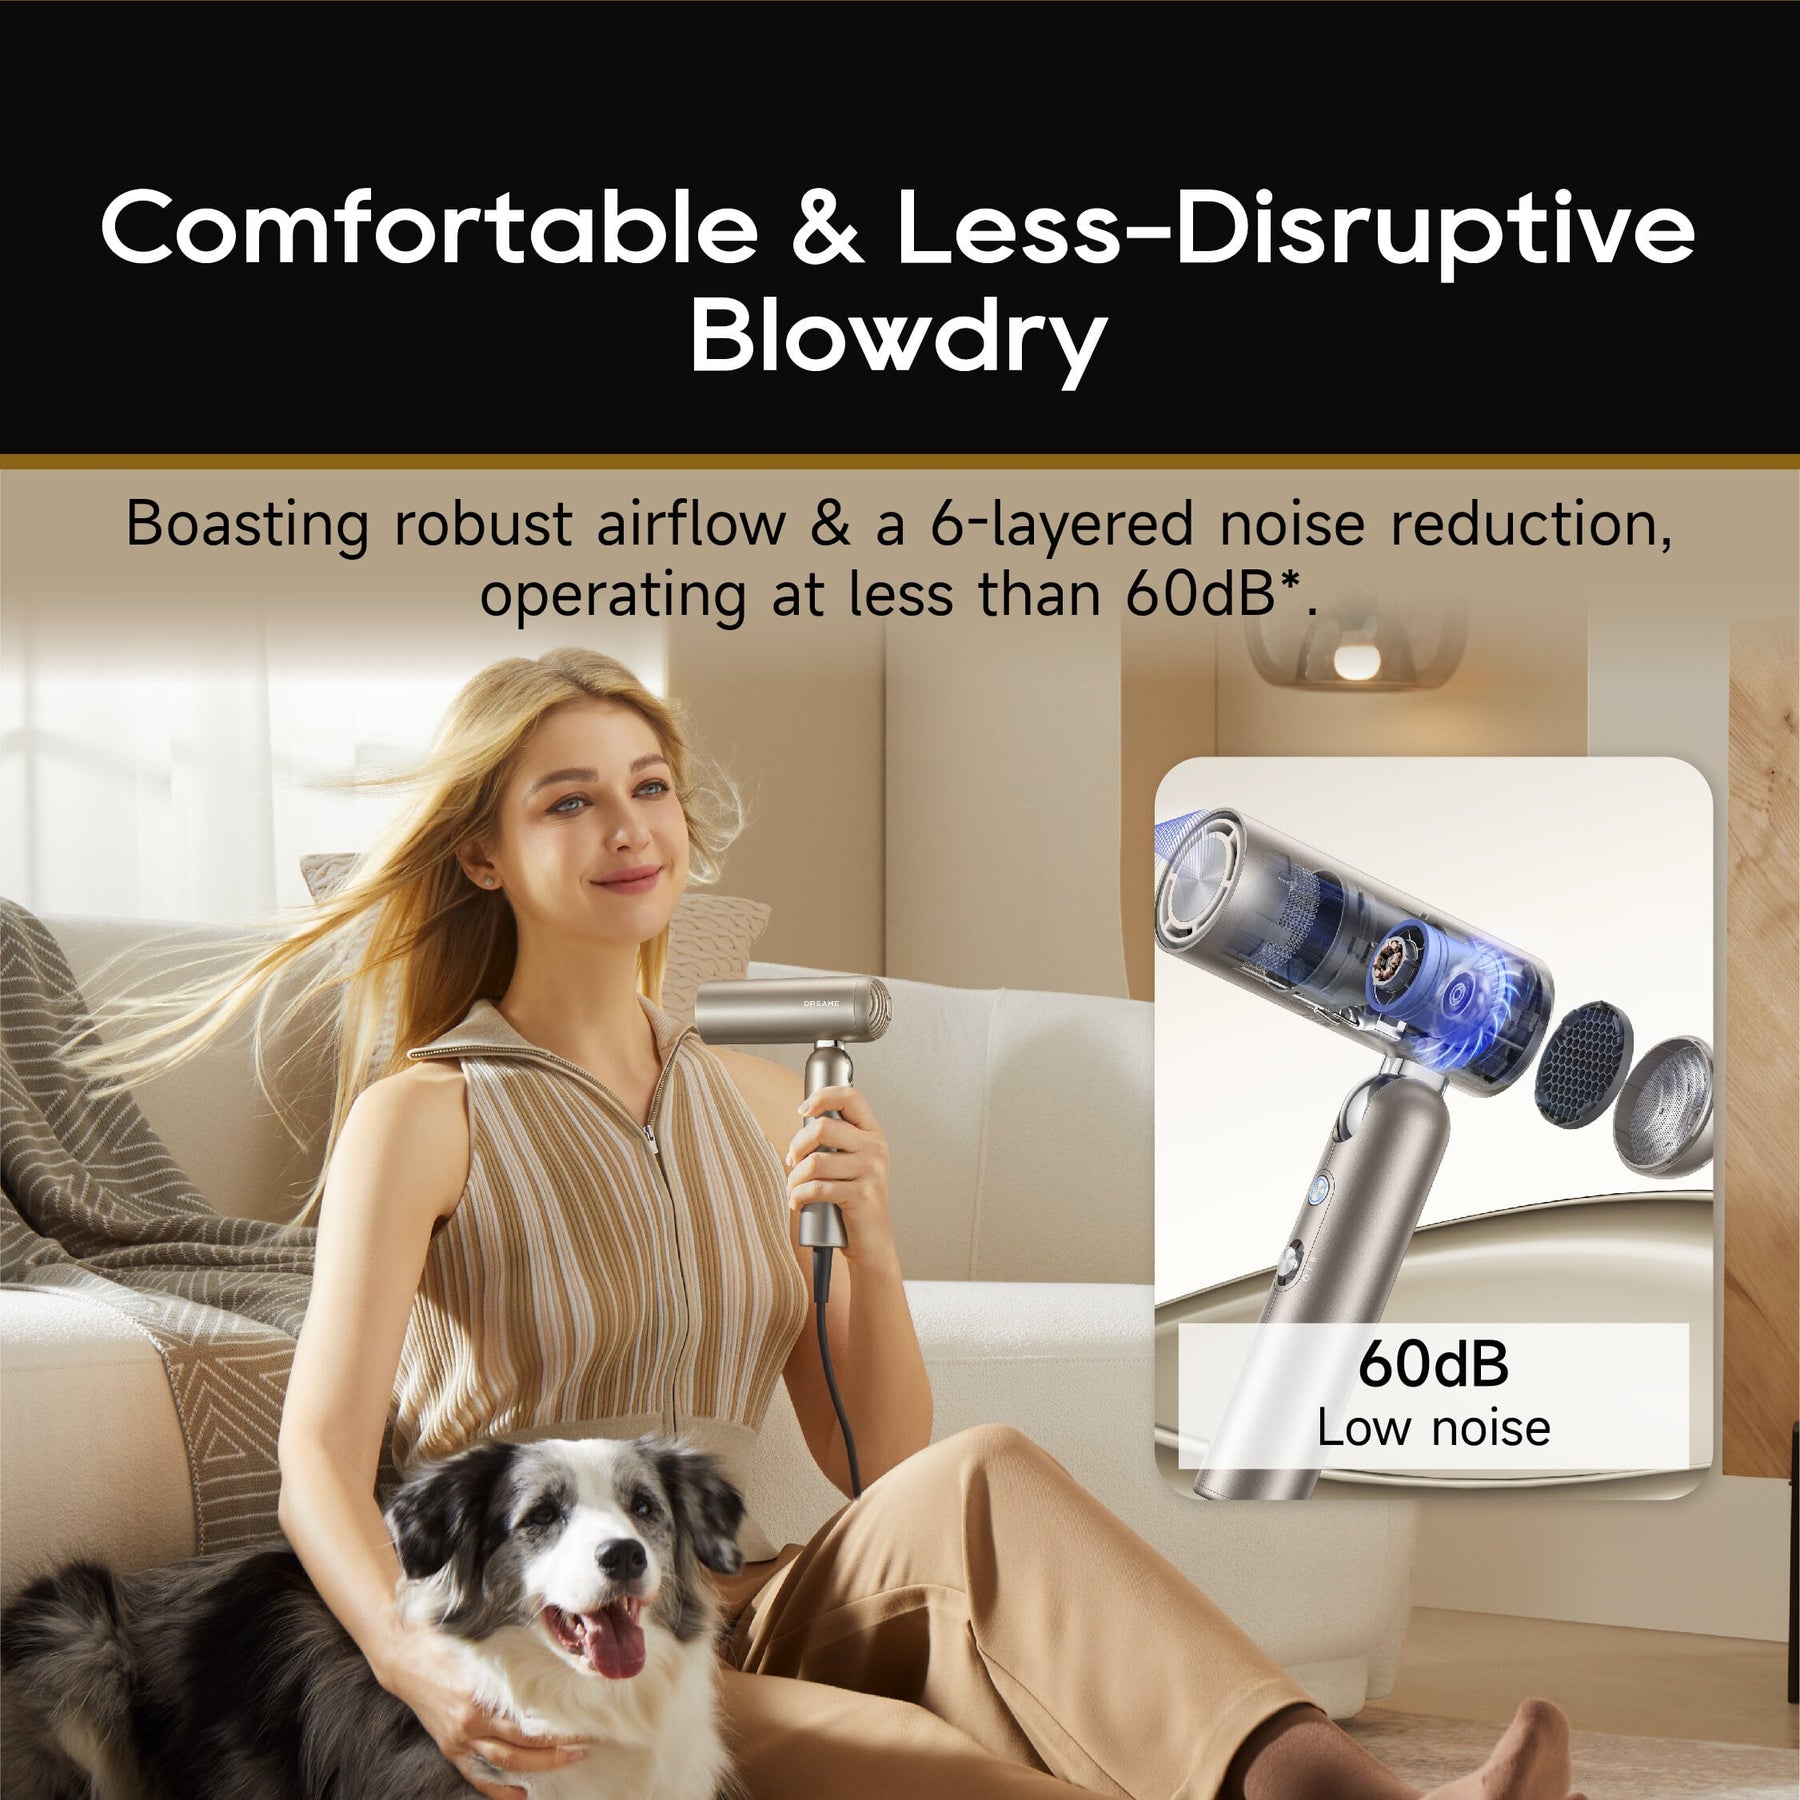 【NEW】 Dreame Pocket High-Speed Hair Dryer | Curling, Unfrizz Nozzles | 300g Portable, Powerful | 60dB